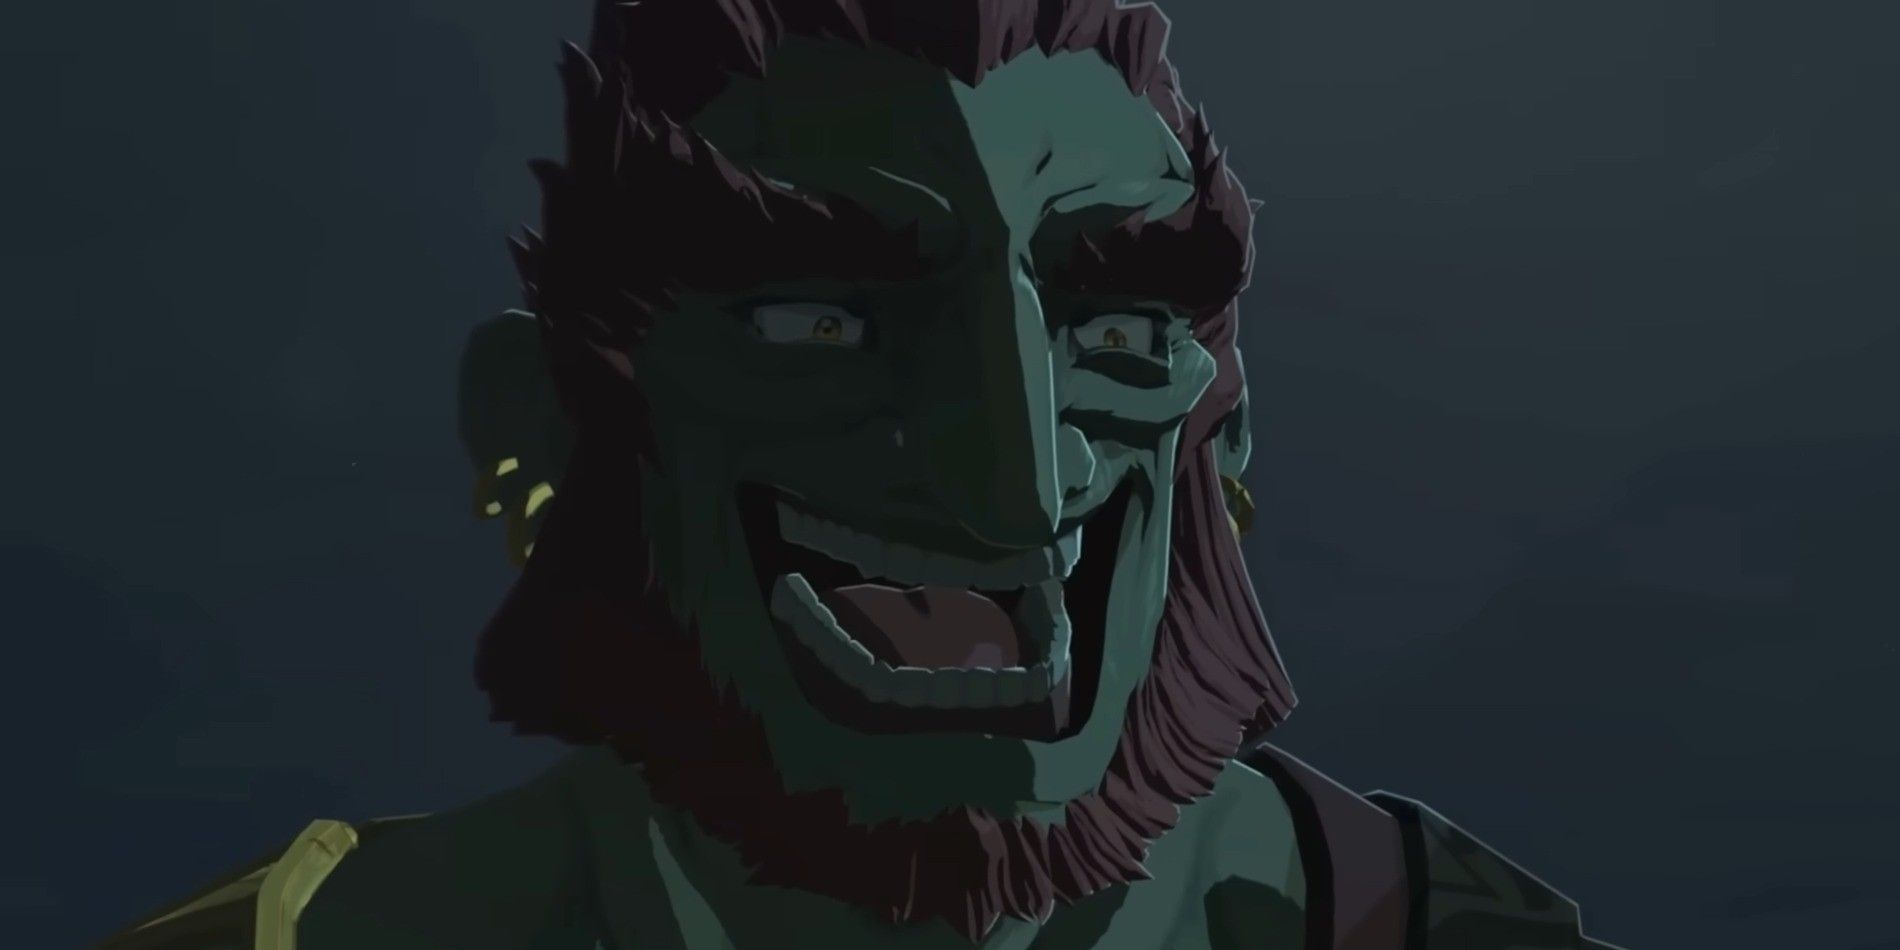 Ganondorf giving a wide grin after murdering Sonia in The Legend of Zelda: Tears of the Kingdom.